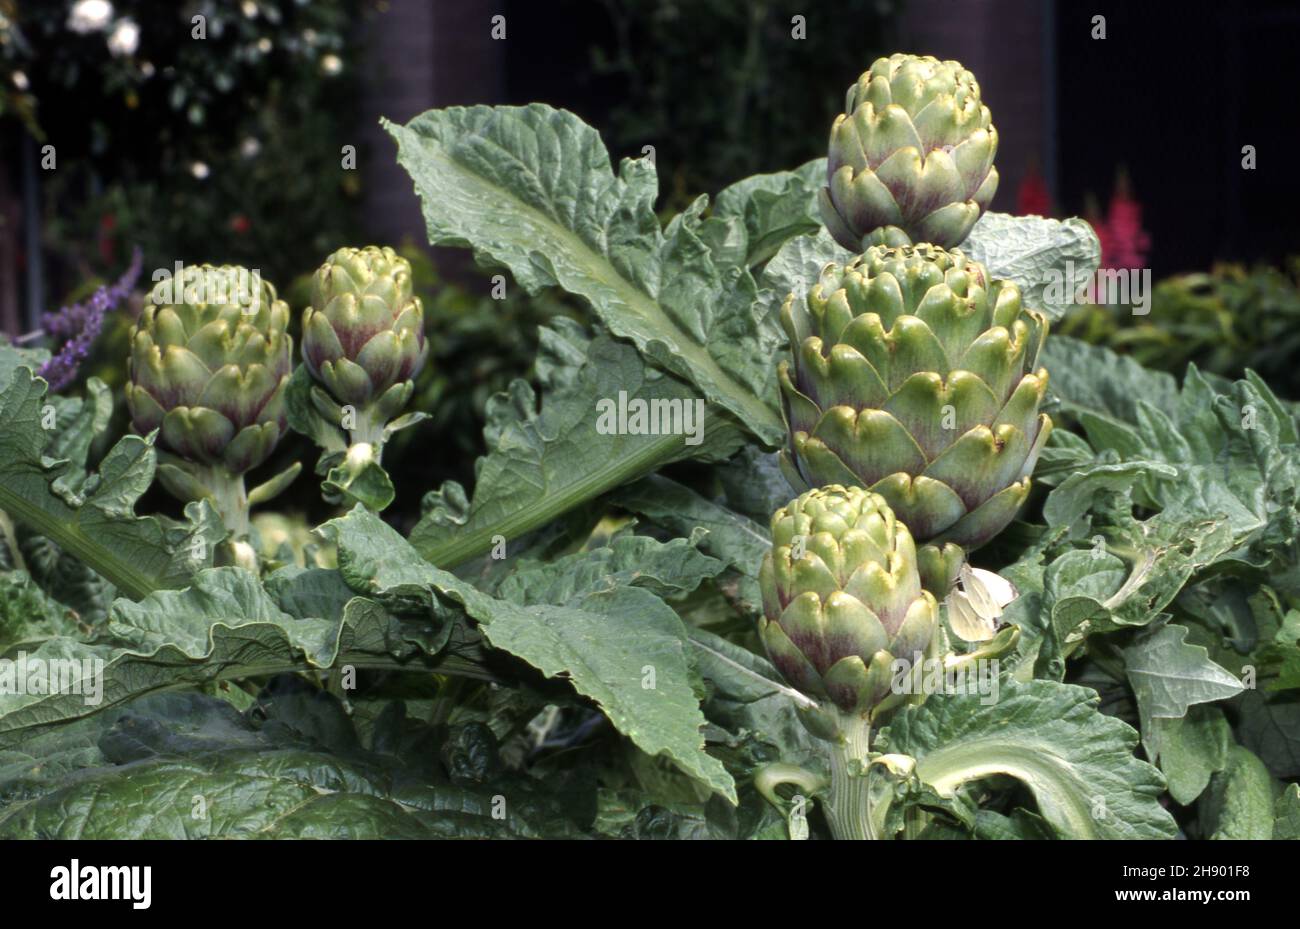 GLOBE ARTICHOKES (CYNARA CARDUNCULUS SYN. SCOLYMUS) GROWING. ALSO KNOWN AS THE FRENCH ARTICHOKE OR THE GREEN ARTICHOKE. Stock Photo